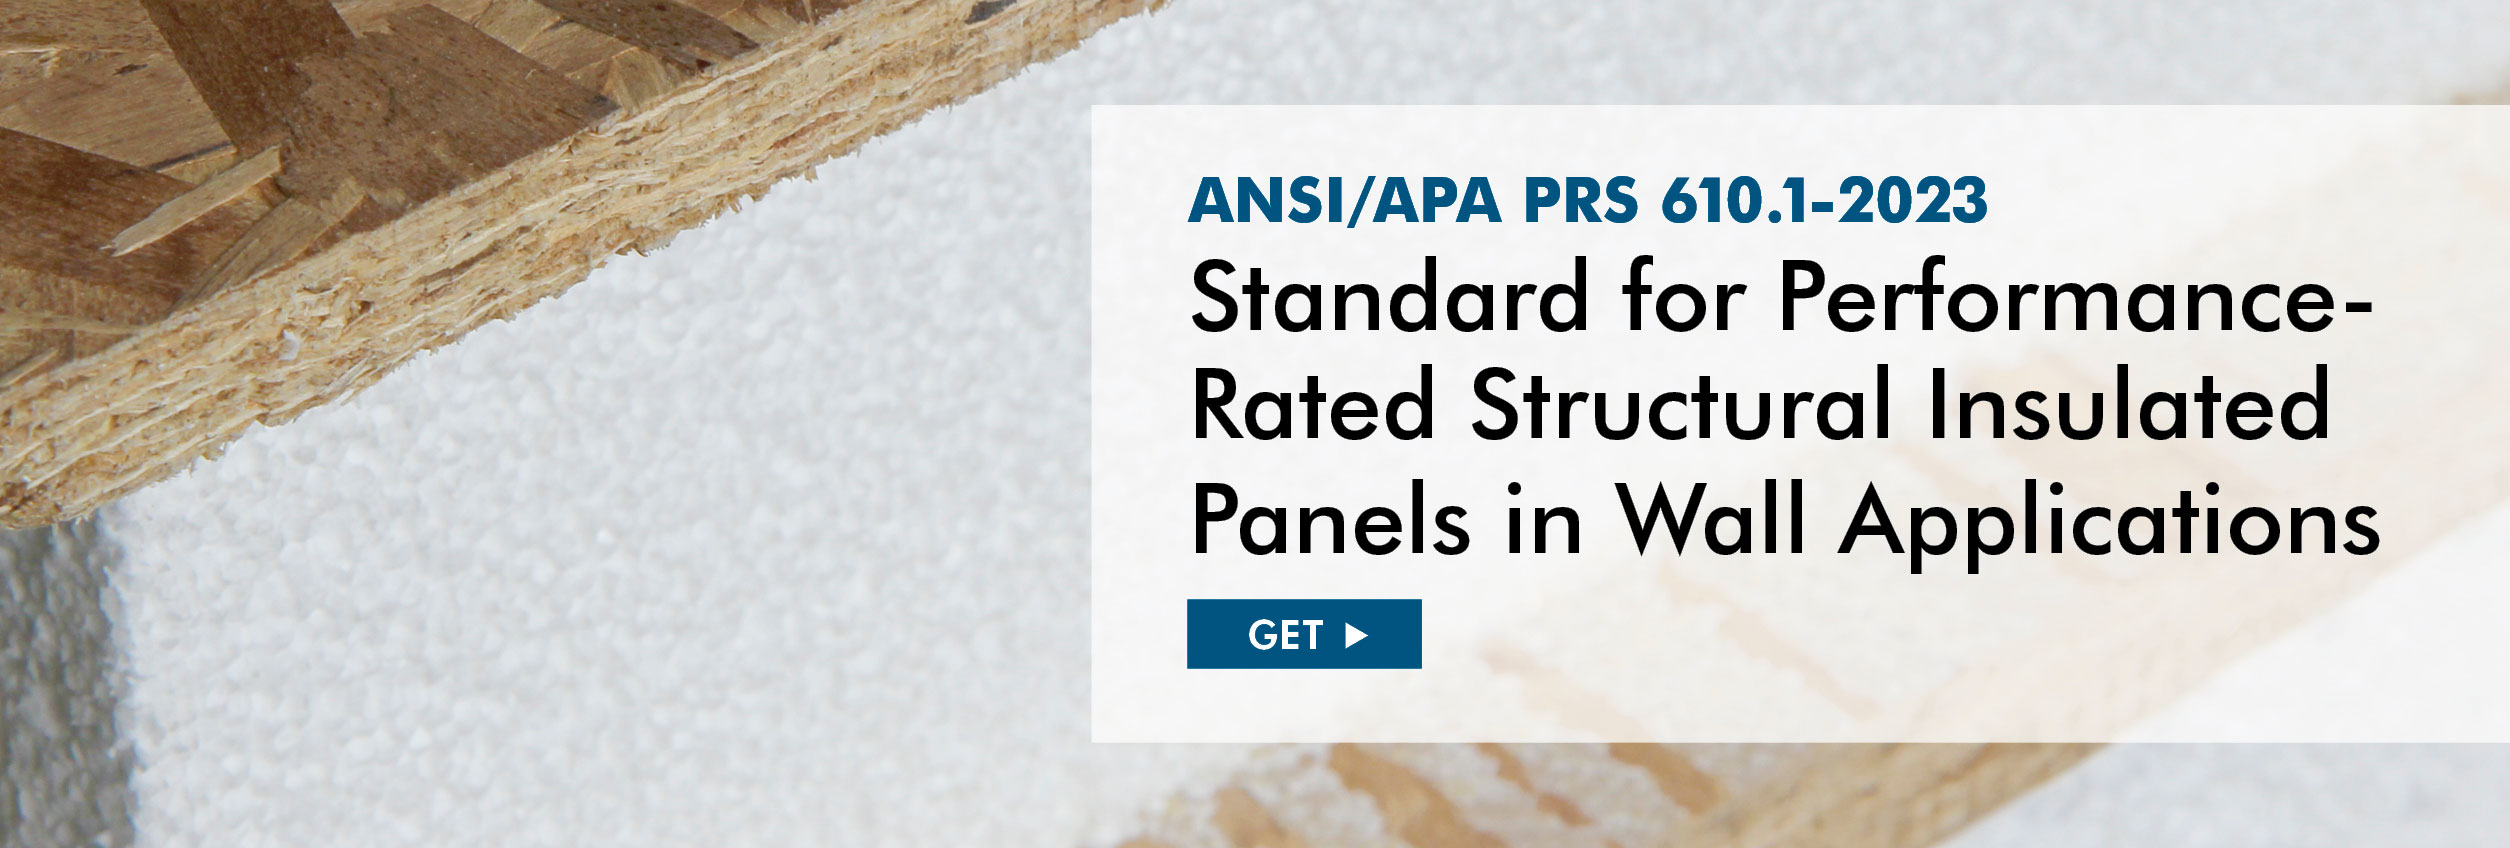 ANSI PRS 610.1-2023 Standard for Performance-Rated Structural Insulated Panels in Wall Applications